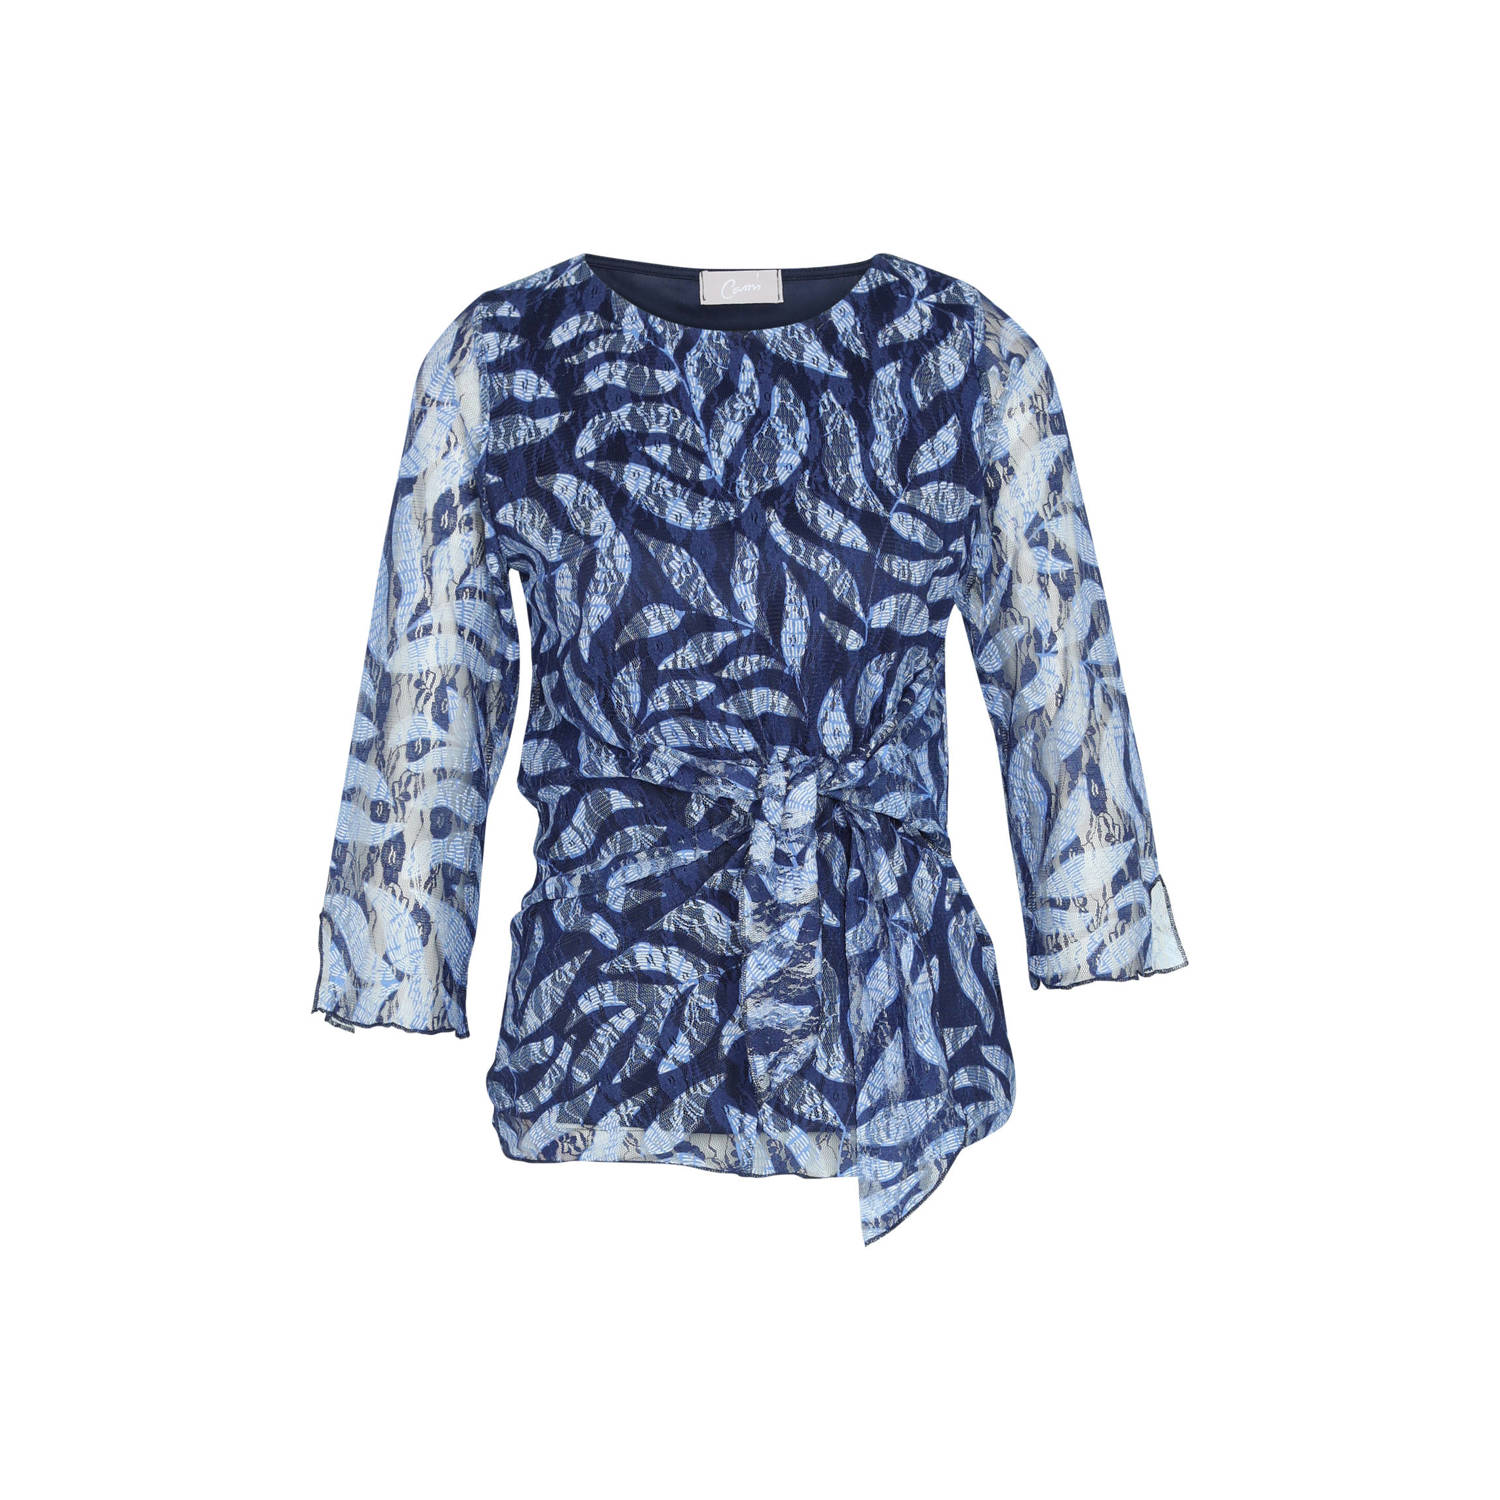 Cassis semi-transparante top met all over print donkerblauw